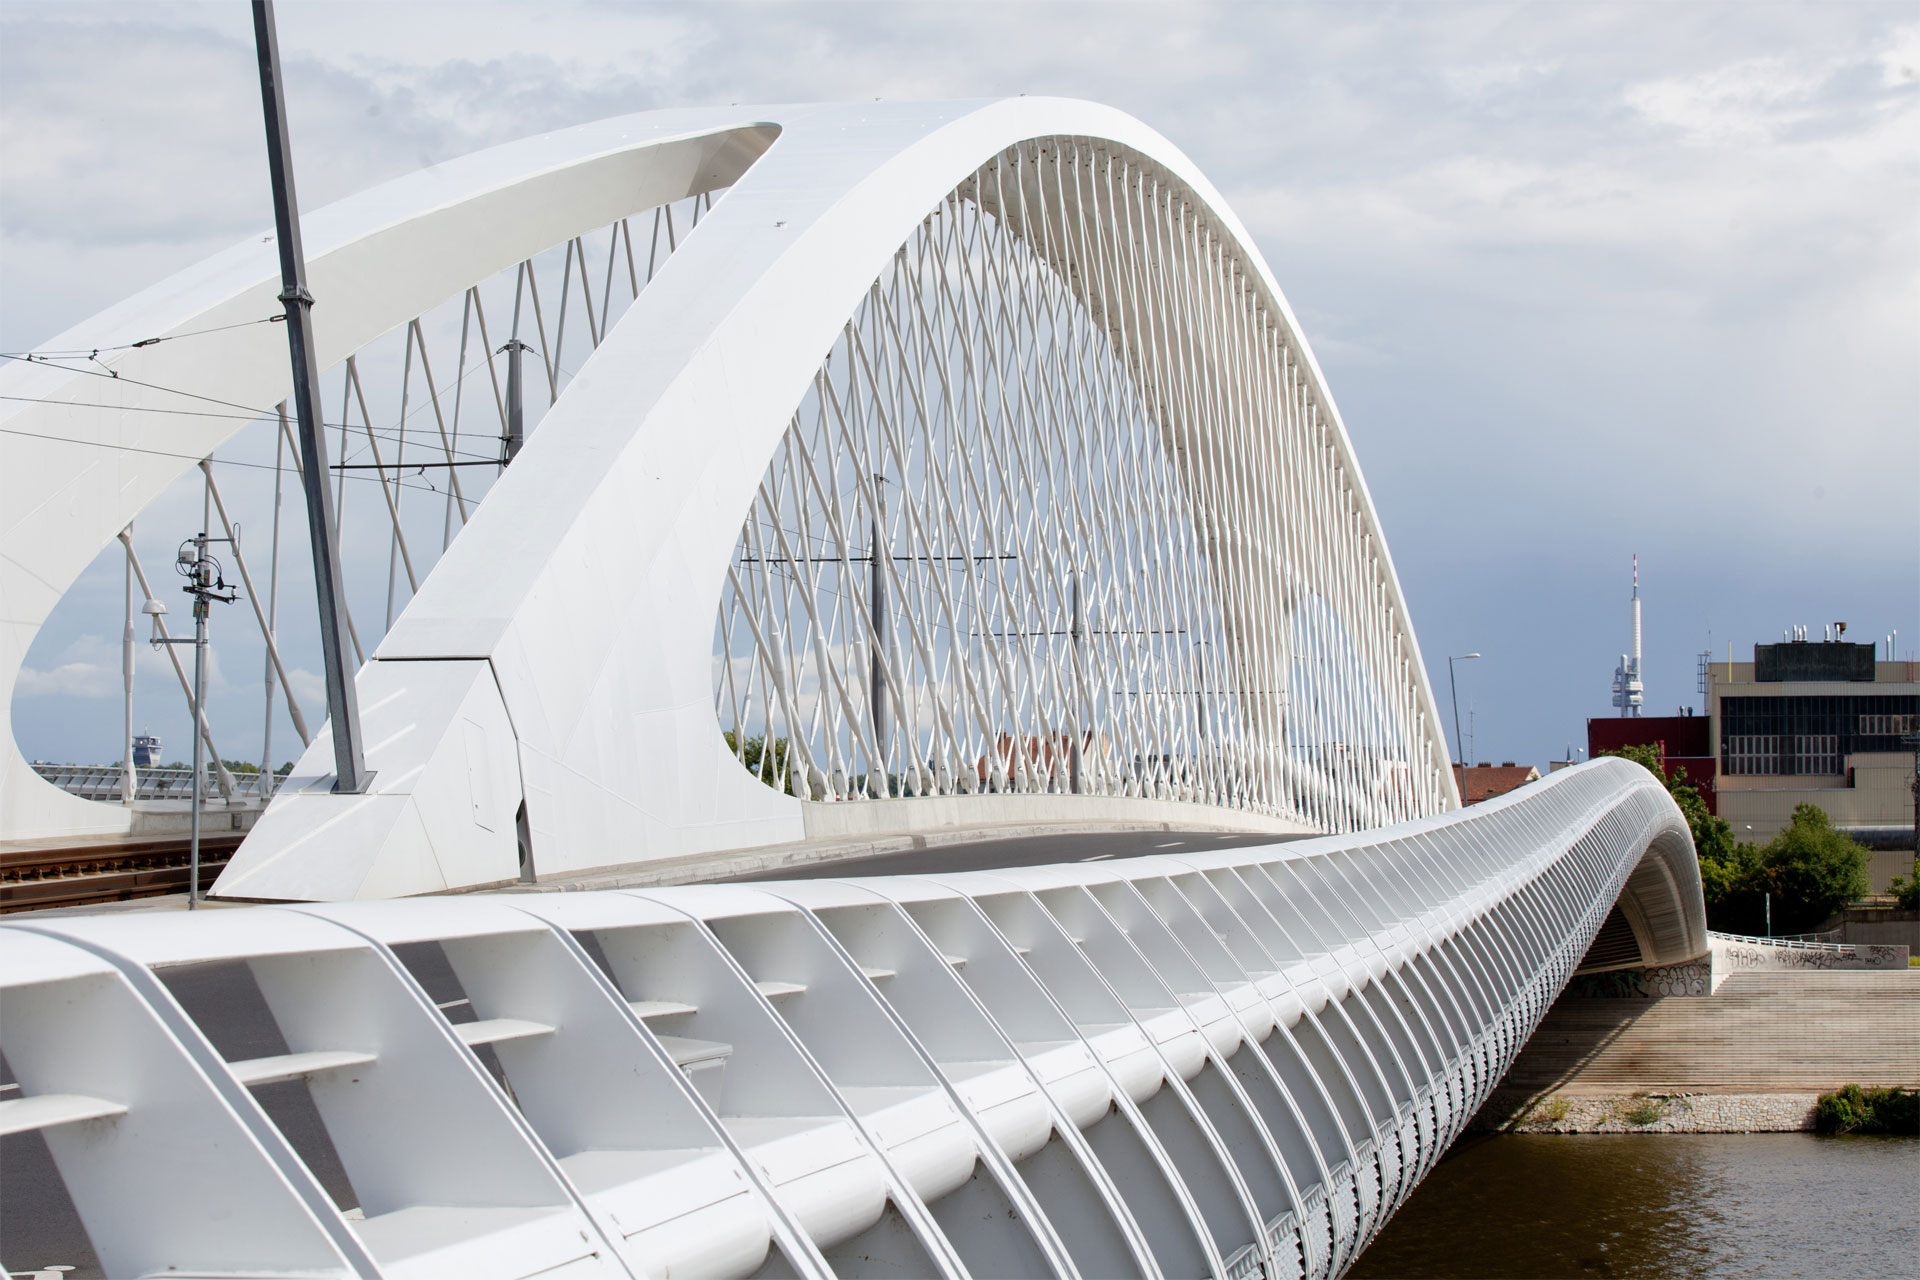 A modern white bridge with a curved design over a river, under a cloudy sky